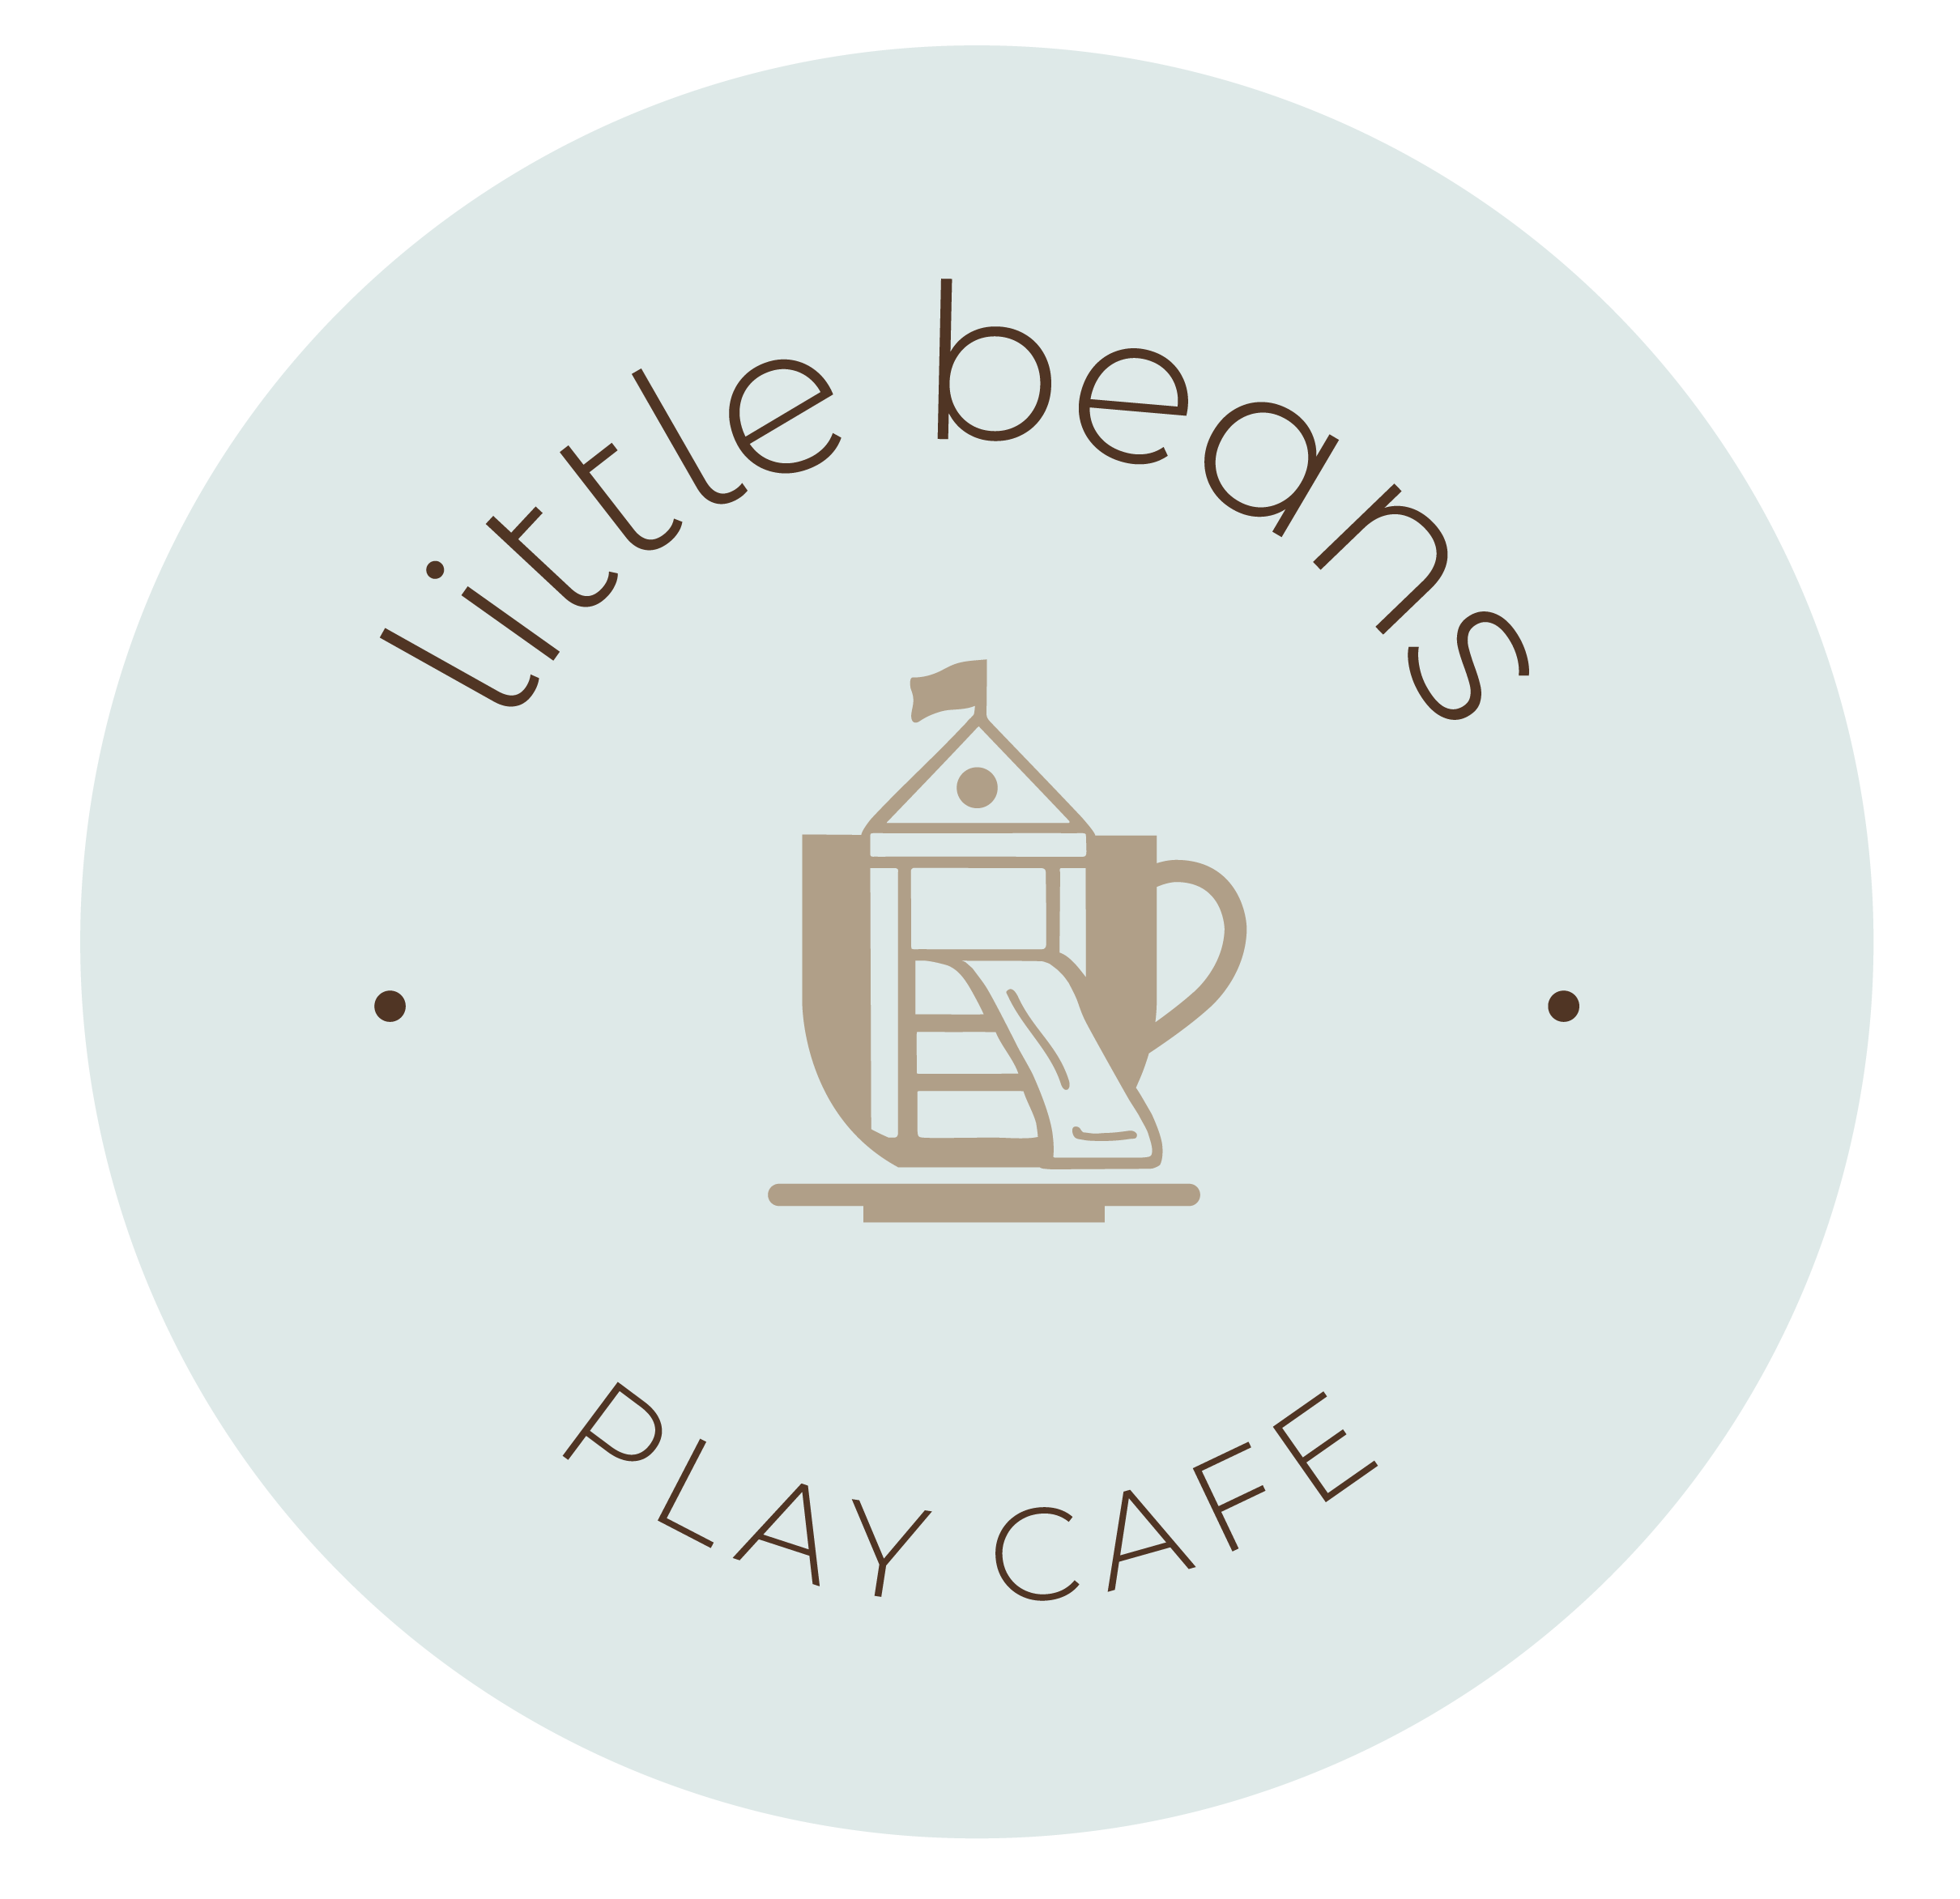 Little Beans Play Cafe photo1